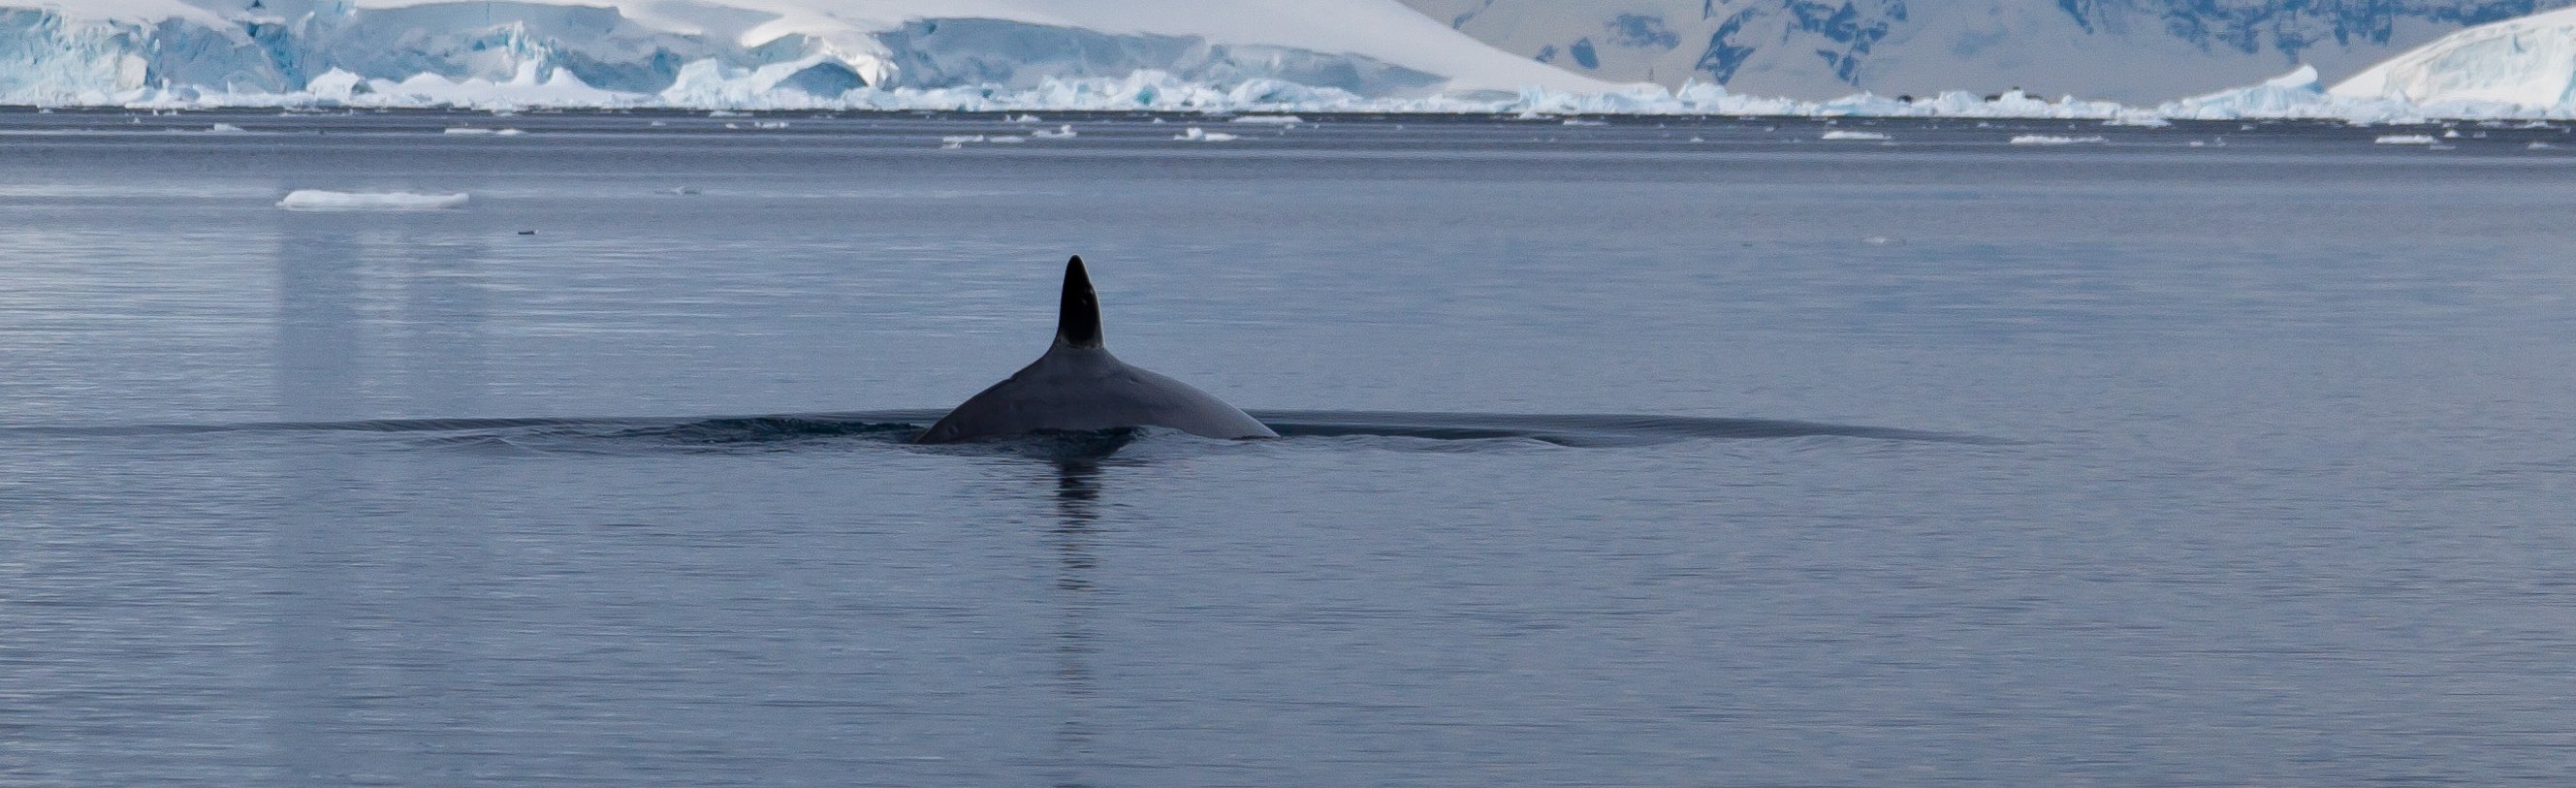 A whale surfaces in Antarctica (Photo: ravas51/Flickr)